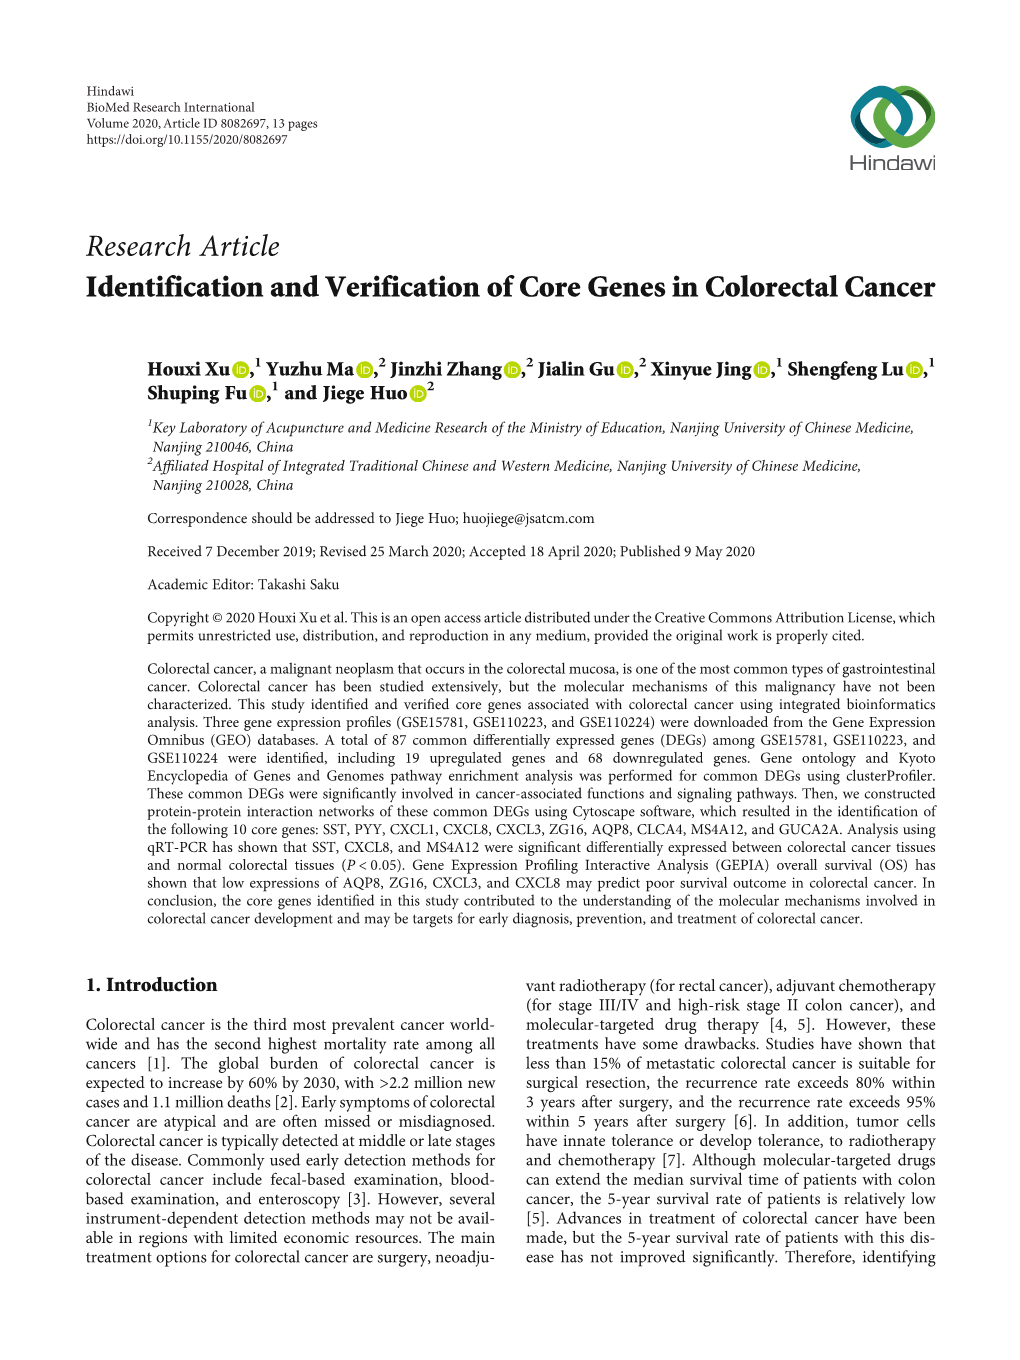 Identification and Verification of Core Genes in Colorectal Cancer